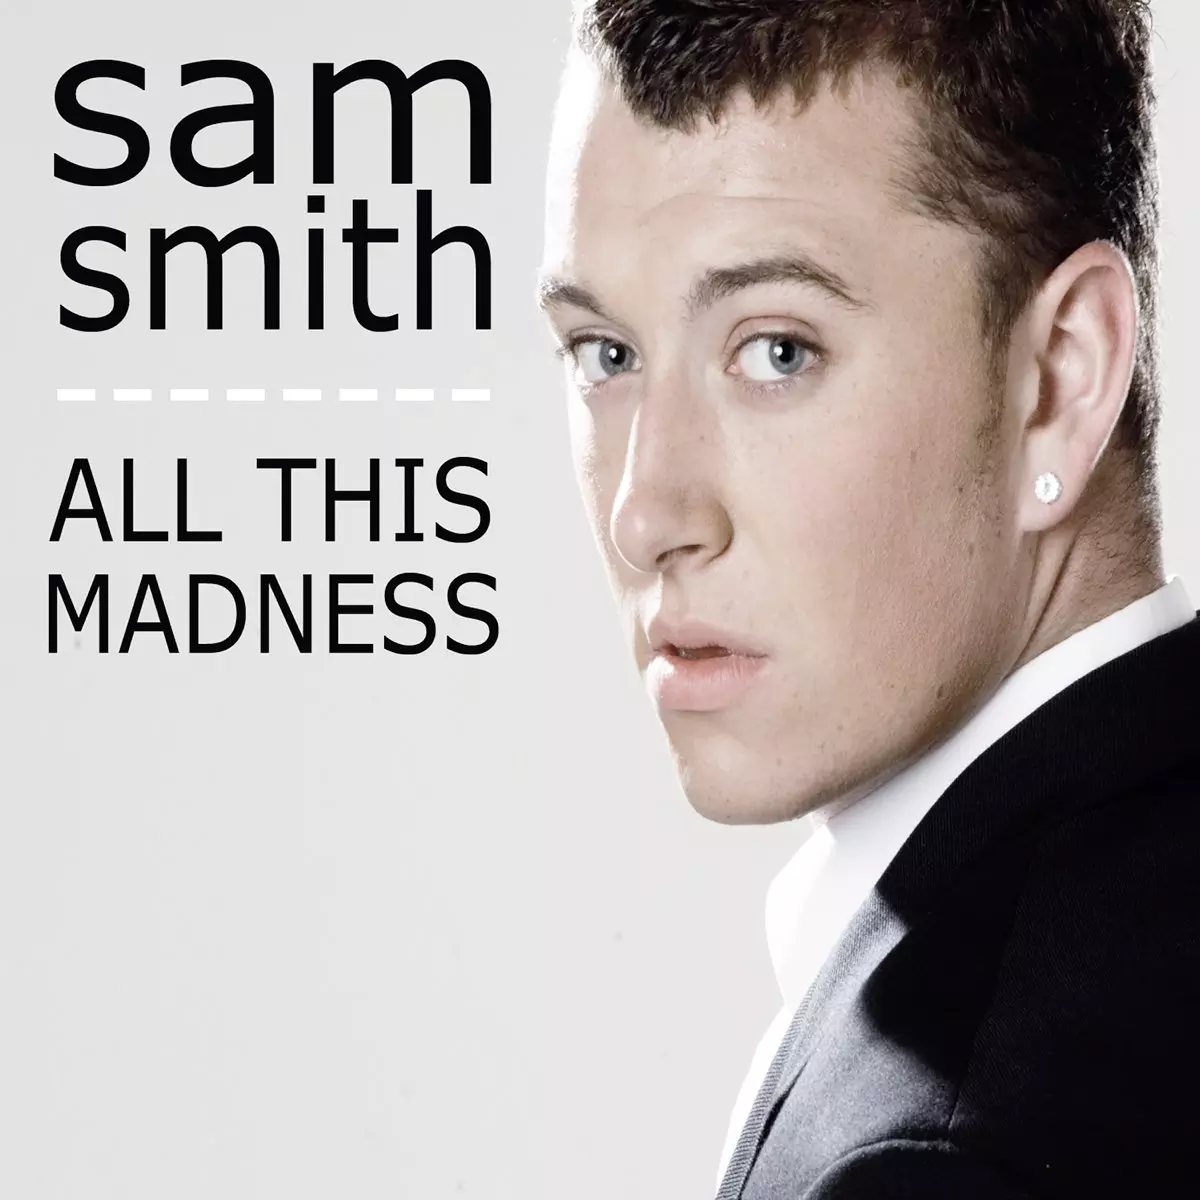 All This Madness - Single by Sam Smith on Apple Music